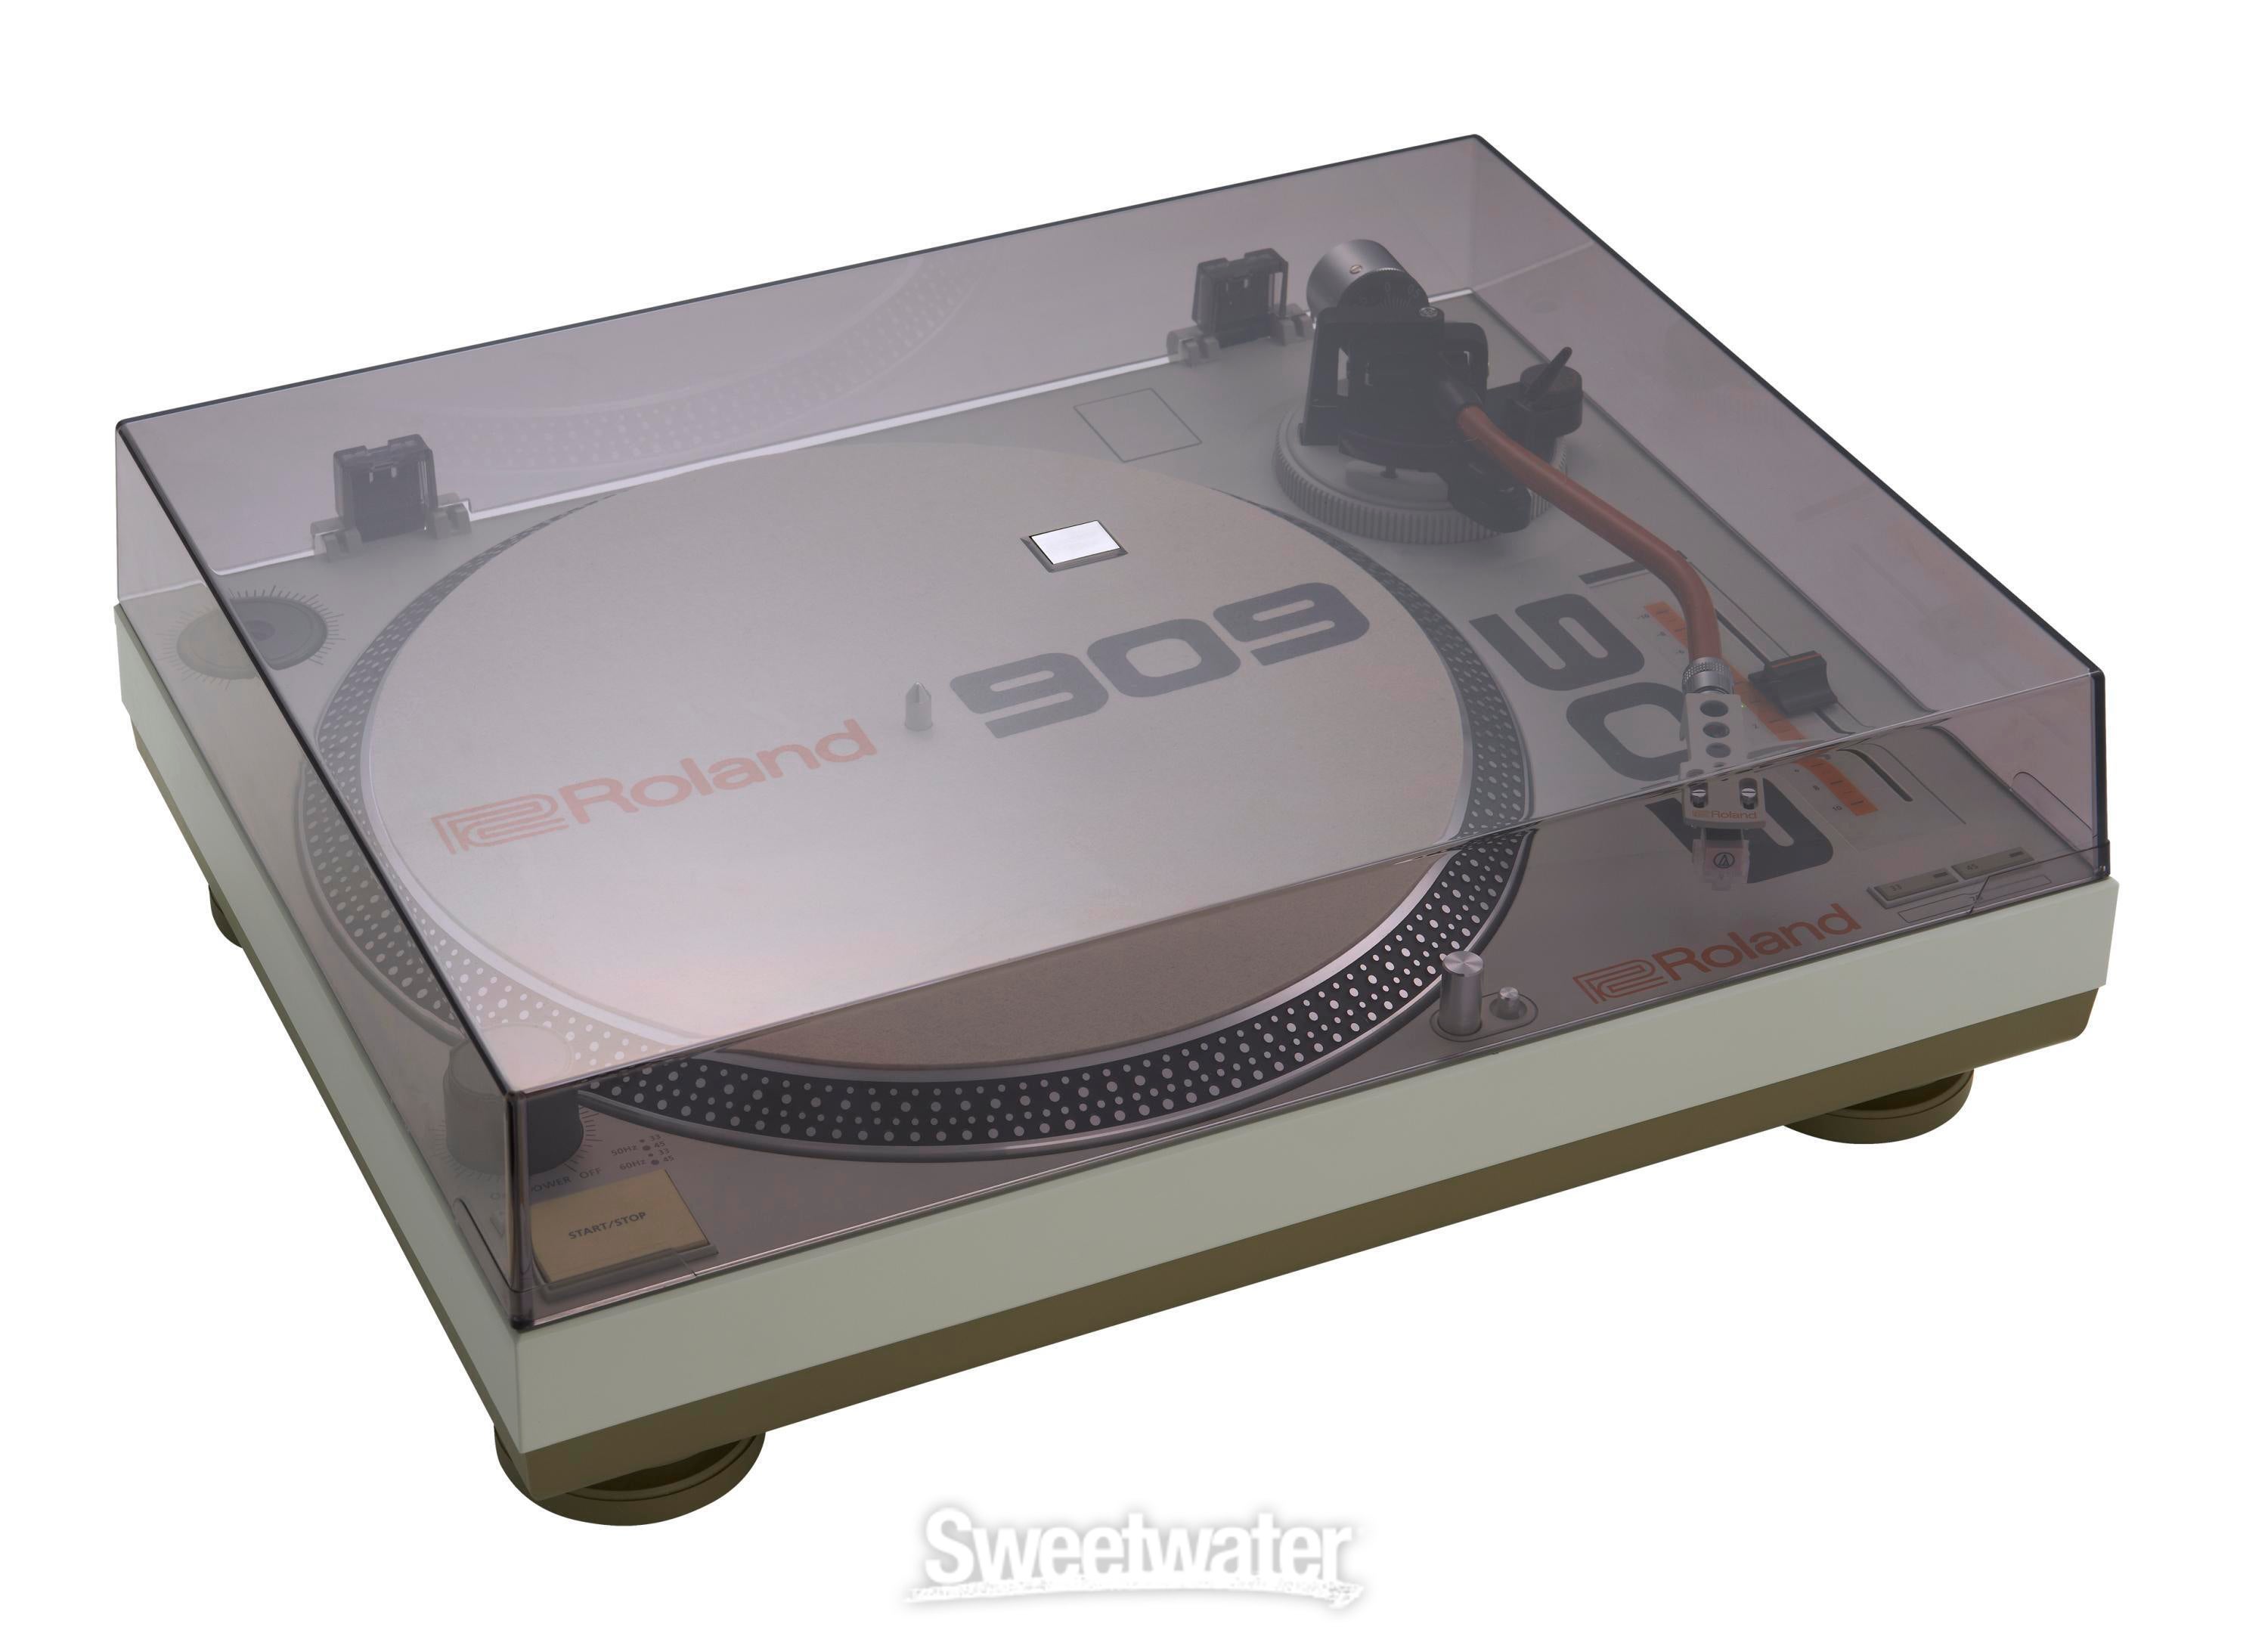 Roland TT-99 Direct-drive Turntable Reviews | Sweetwater